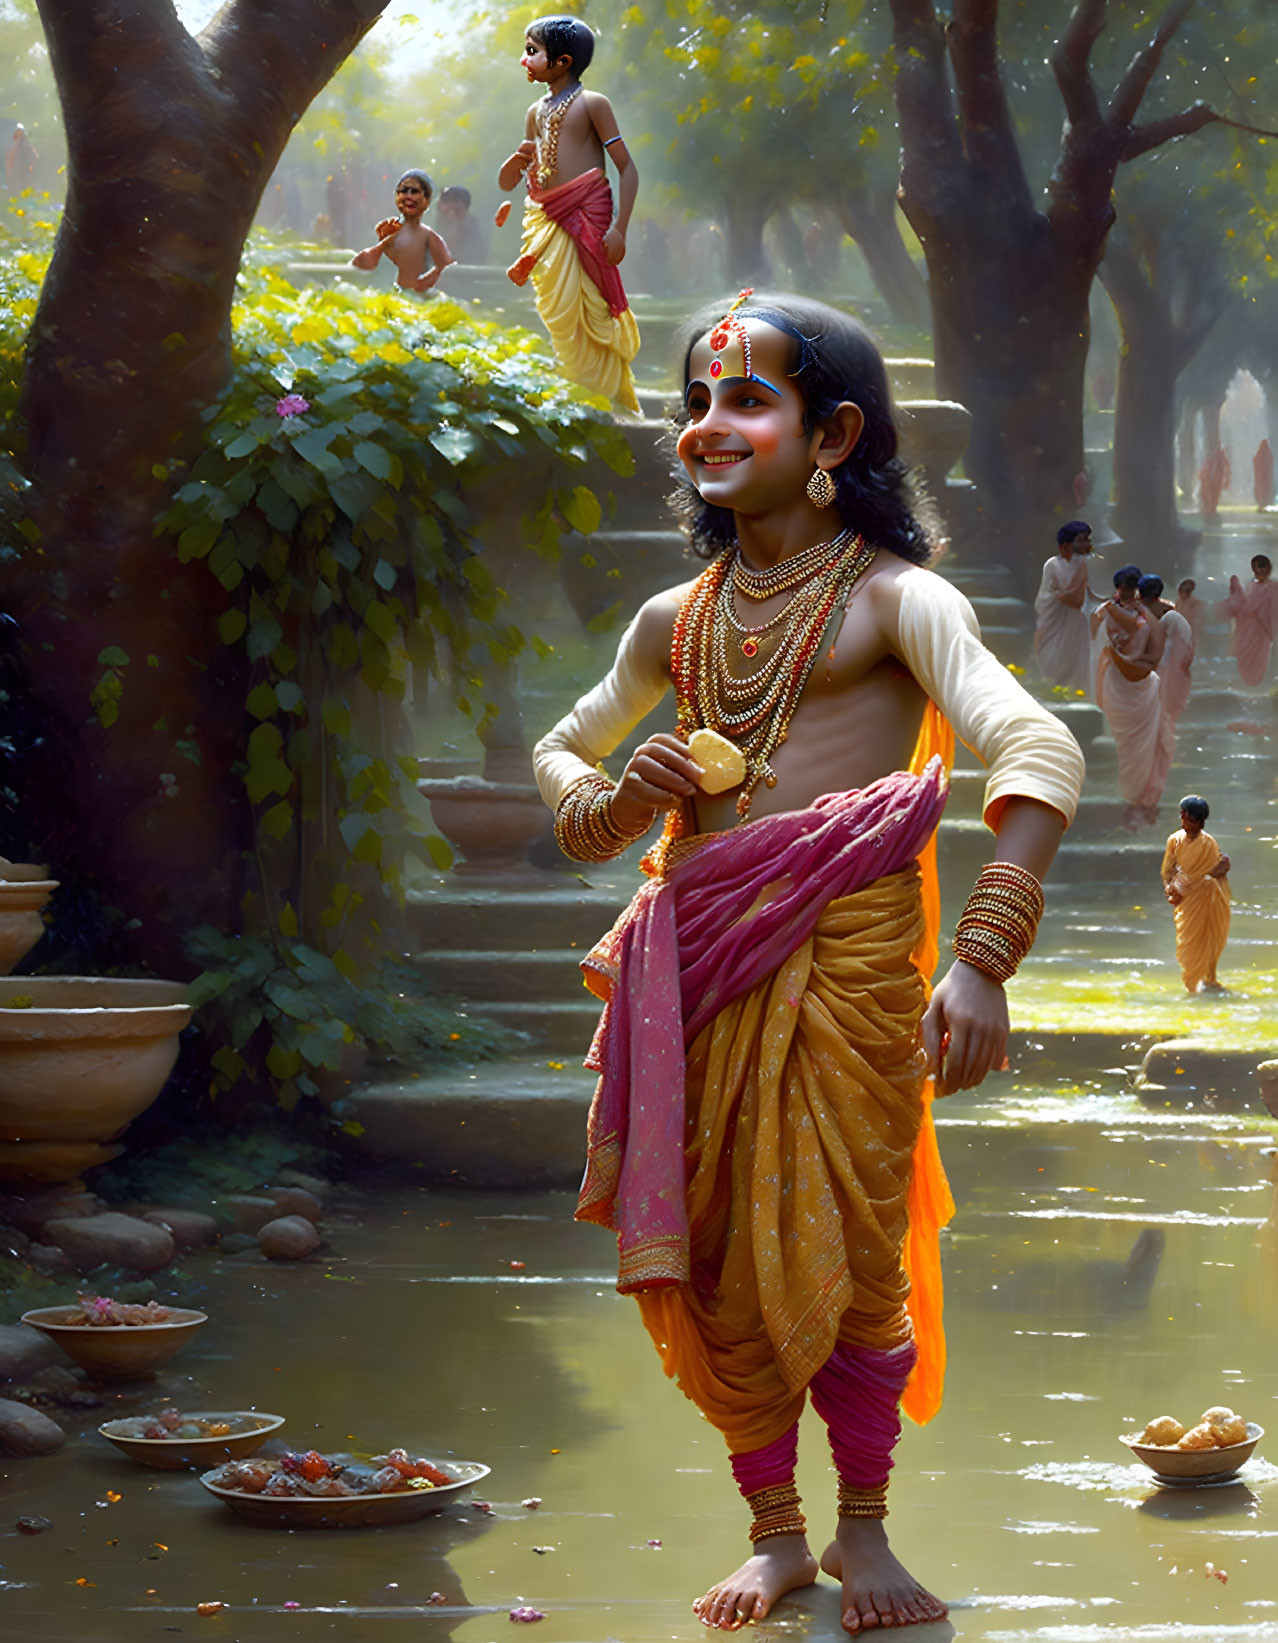 Childhood lordkrishna playing with friends 